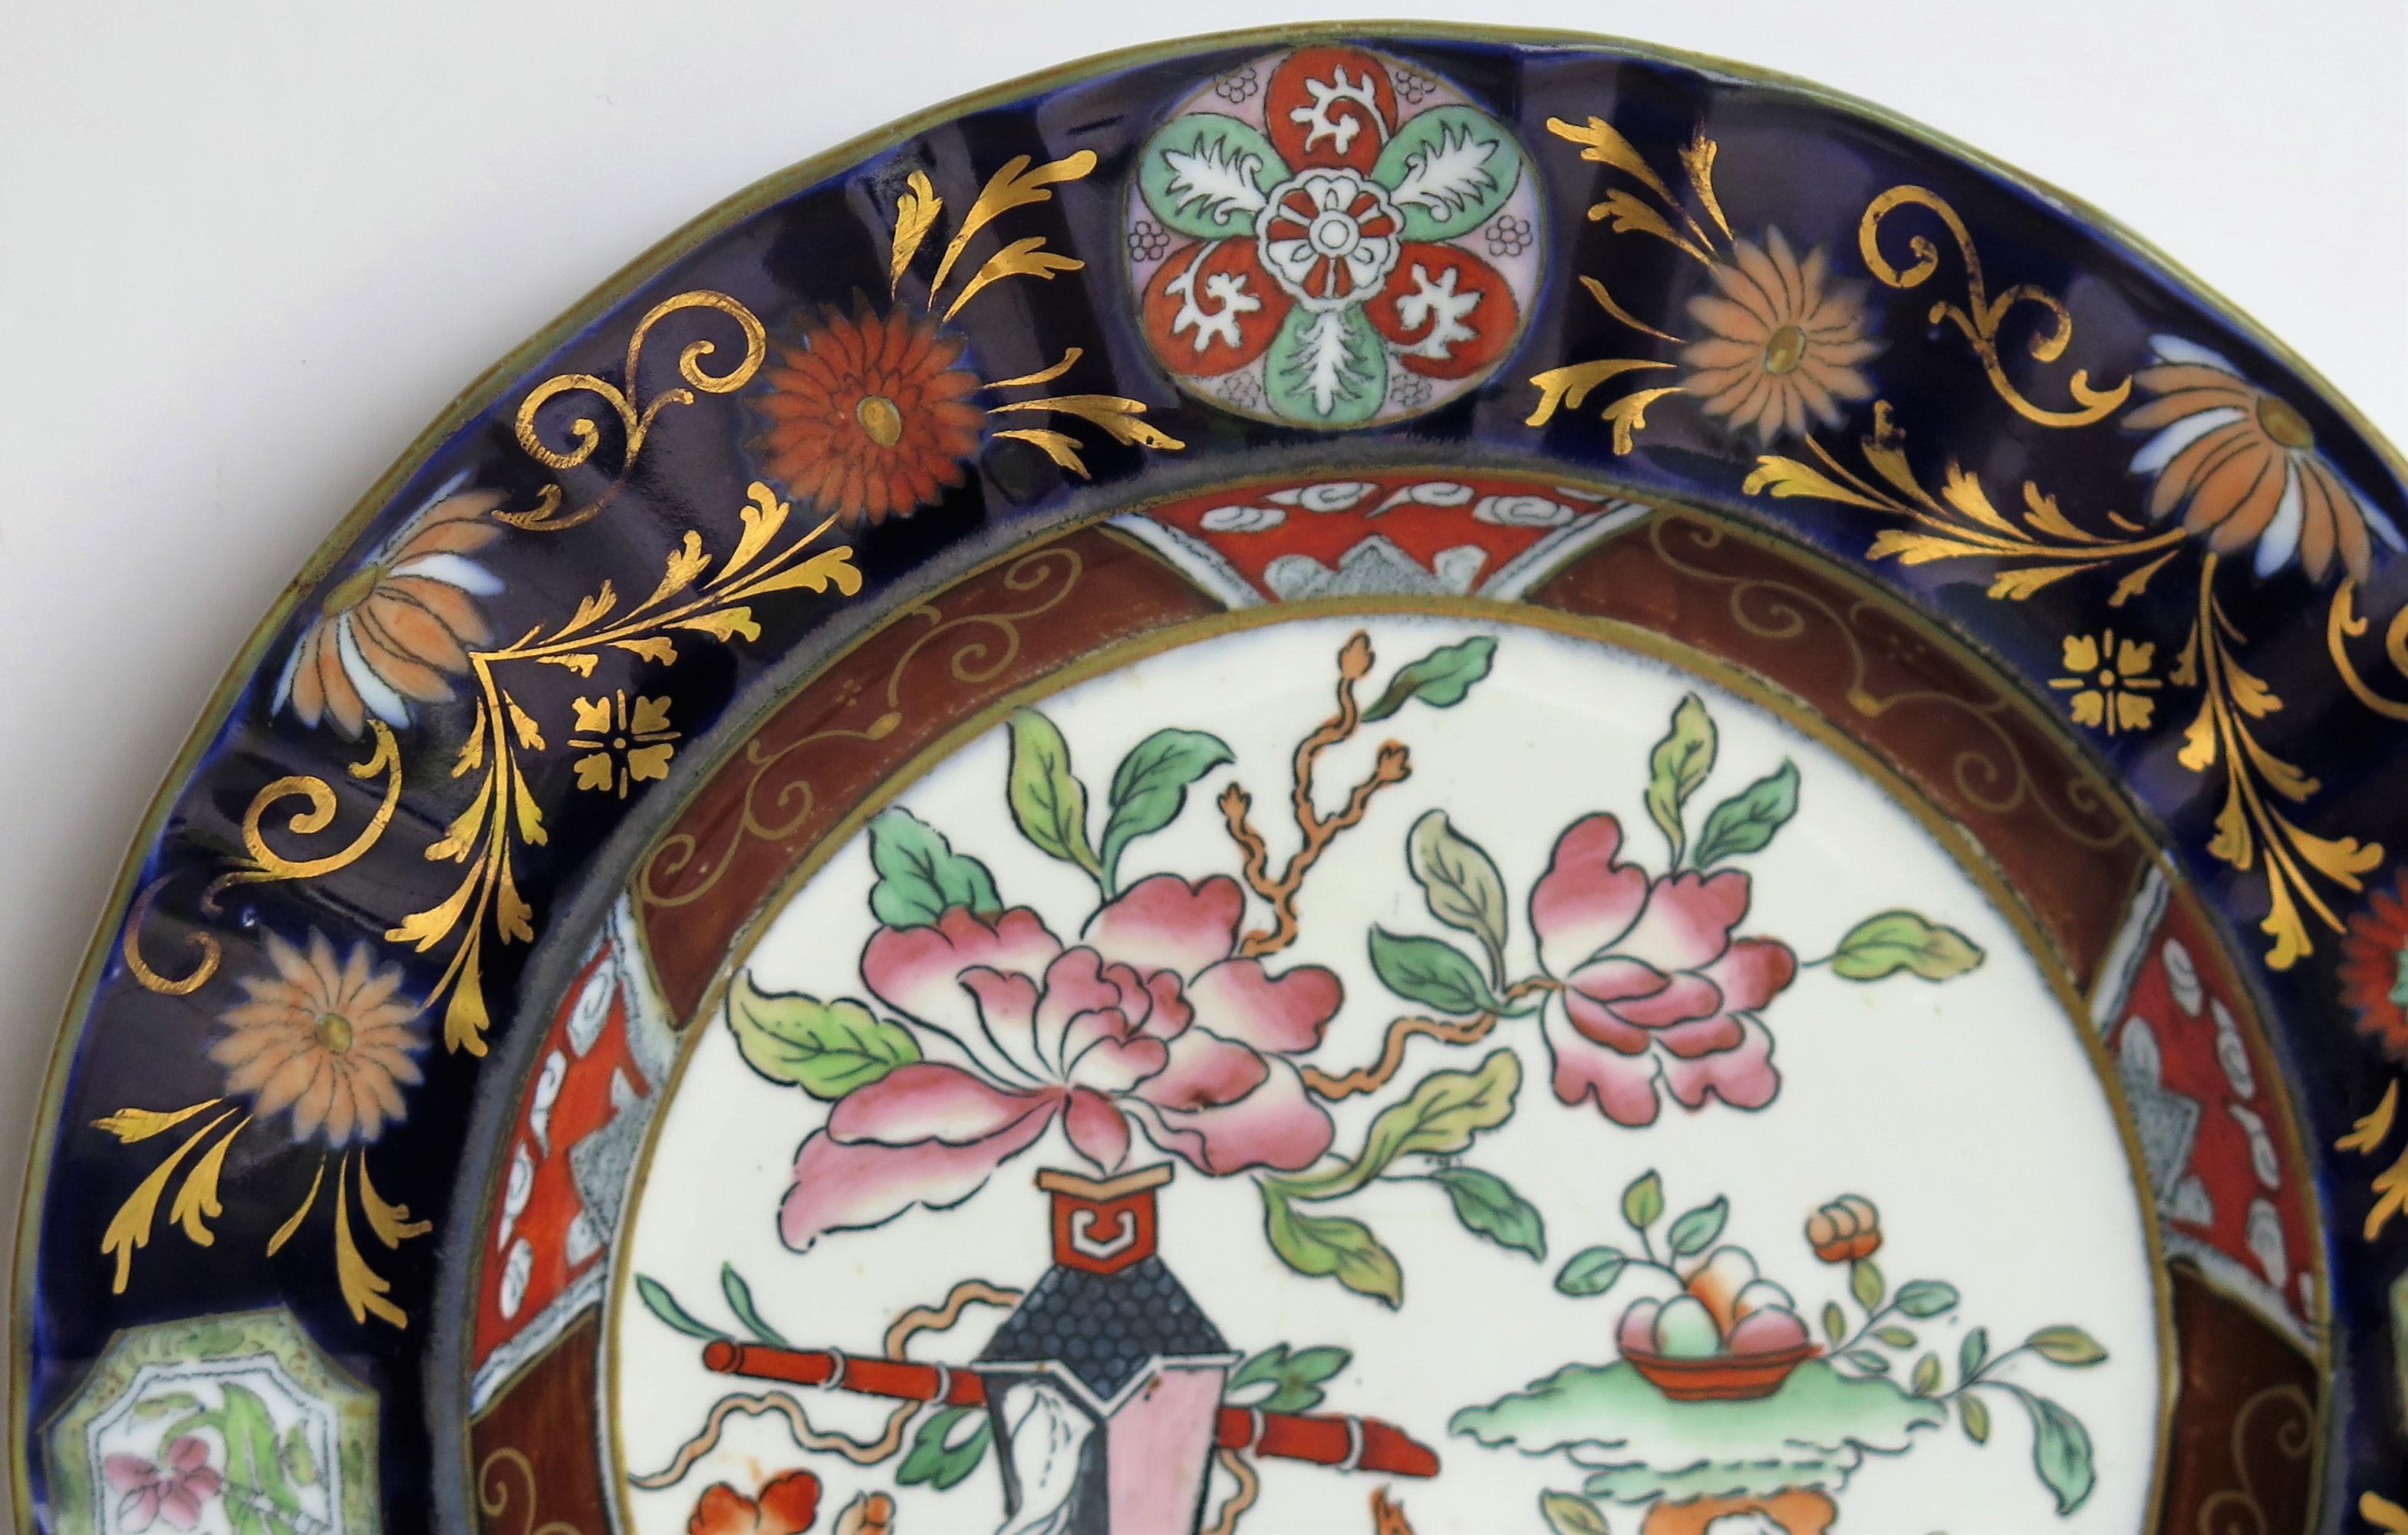 Masons' Ashworths Large Dinner Plate in Table and Flower Pot Pattern, circa 1875 For Sale 5